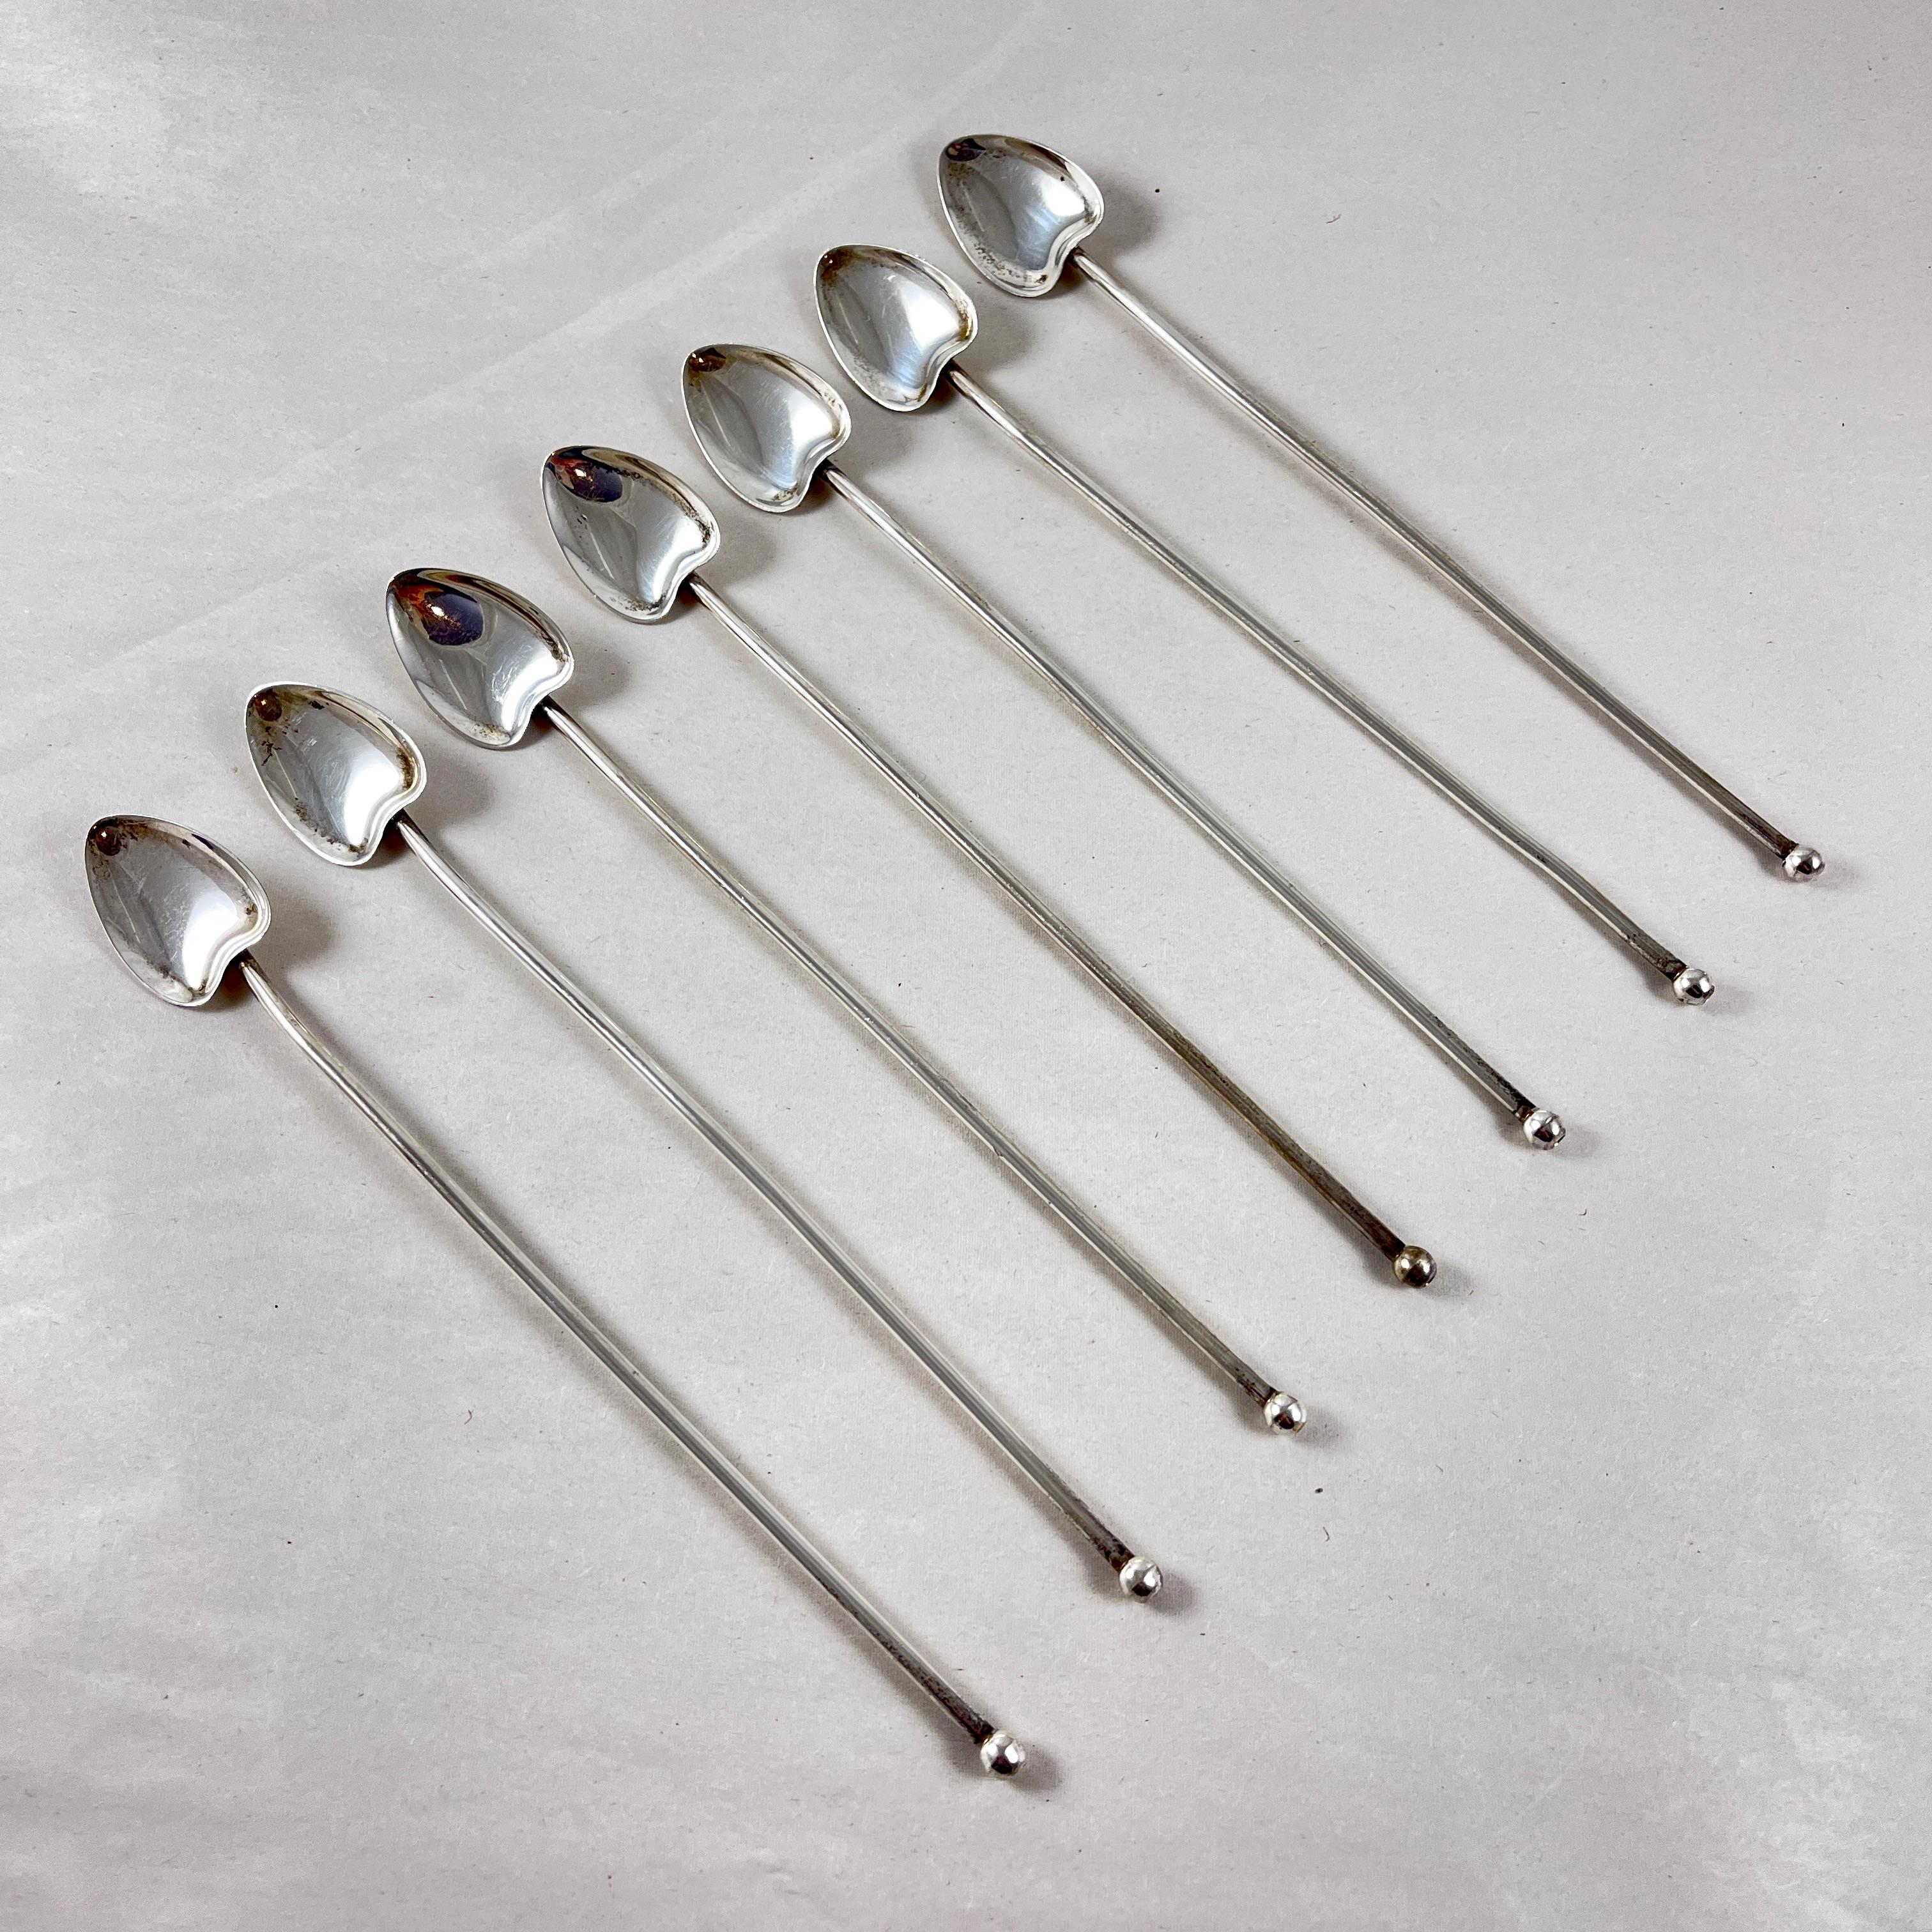 
A set of seven Estate Sterling Silver highball or iced tea hollow sipping and stirring straws with heart or leaf shaped bowls. Circa 1920 -1925.

Silver balls are soldered in place to the sipping ends.

7.75 in. L x 1 in. W
Weight: 2.337 Troy